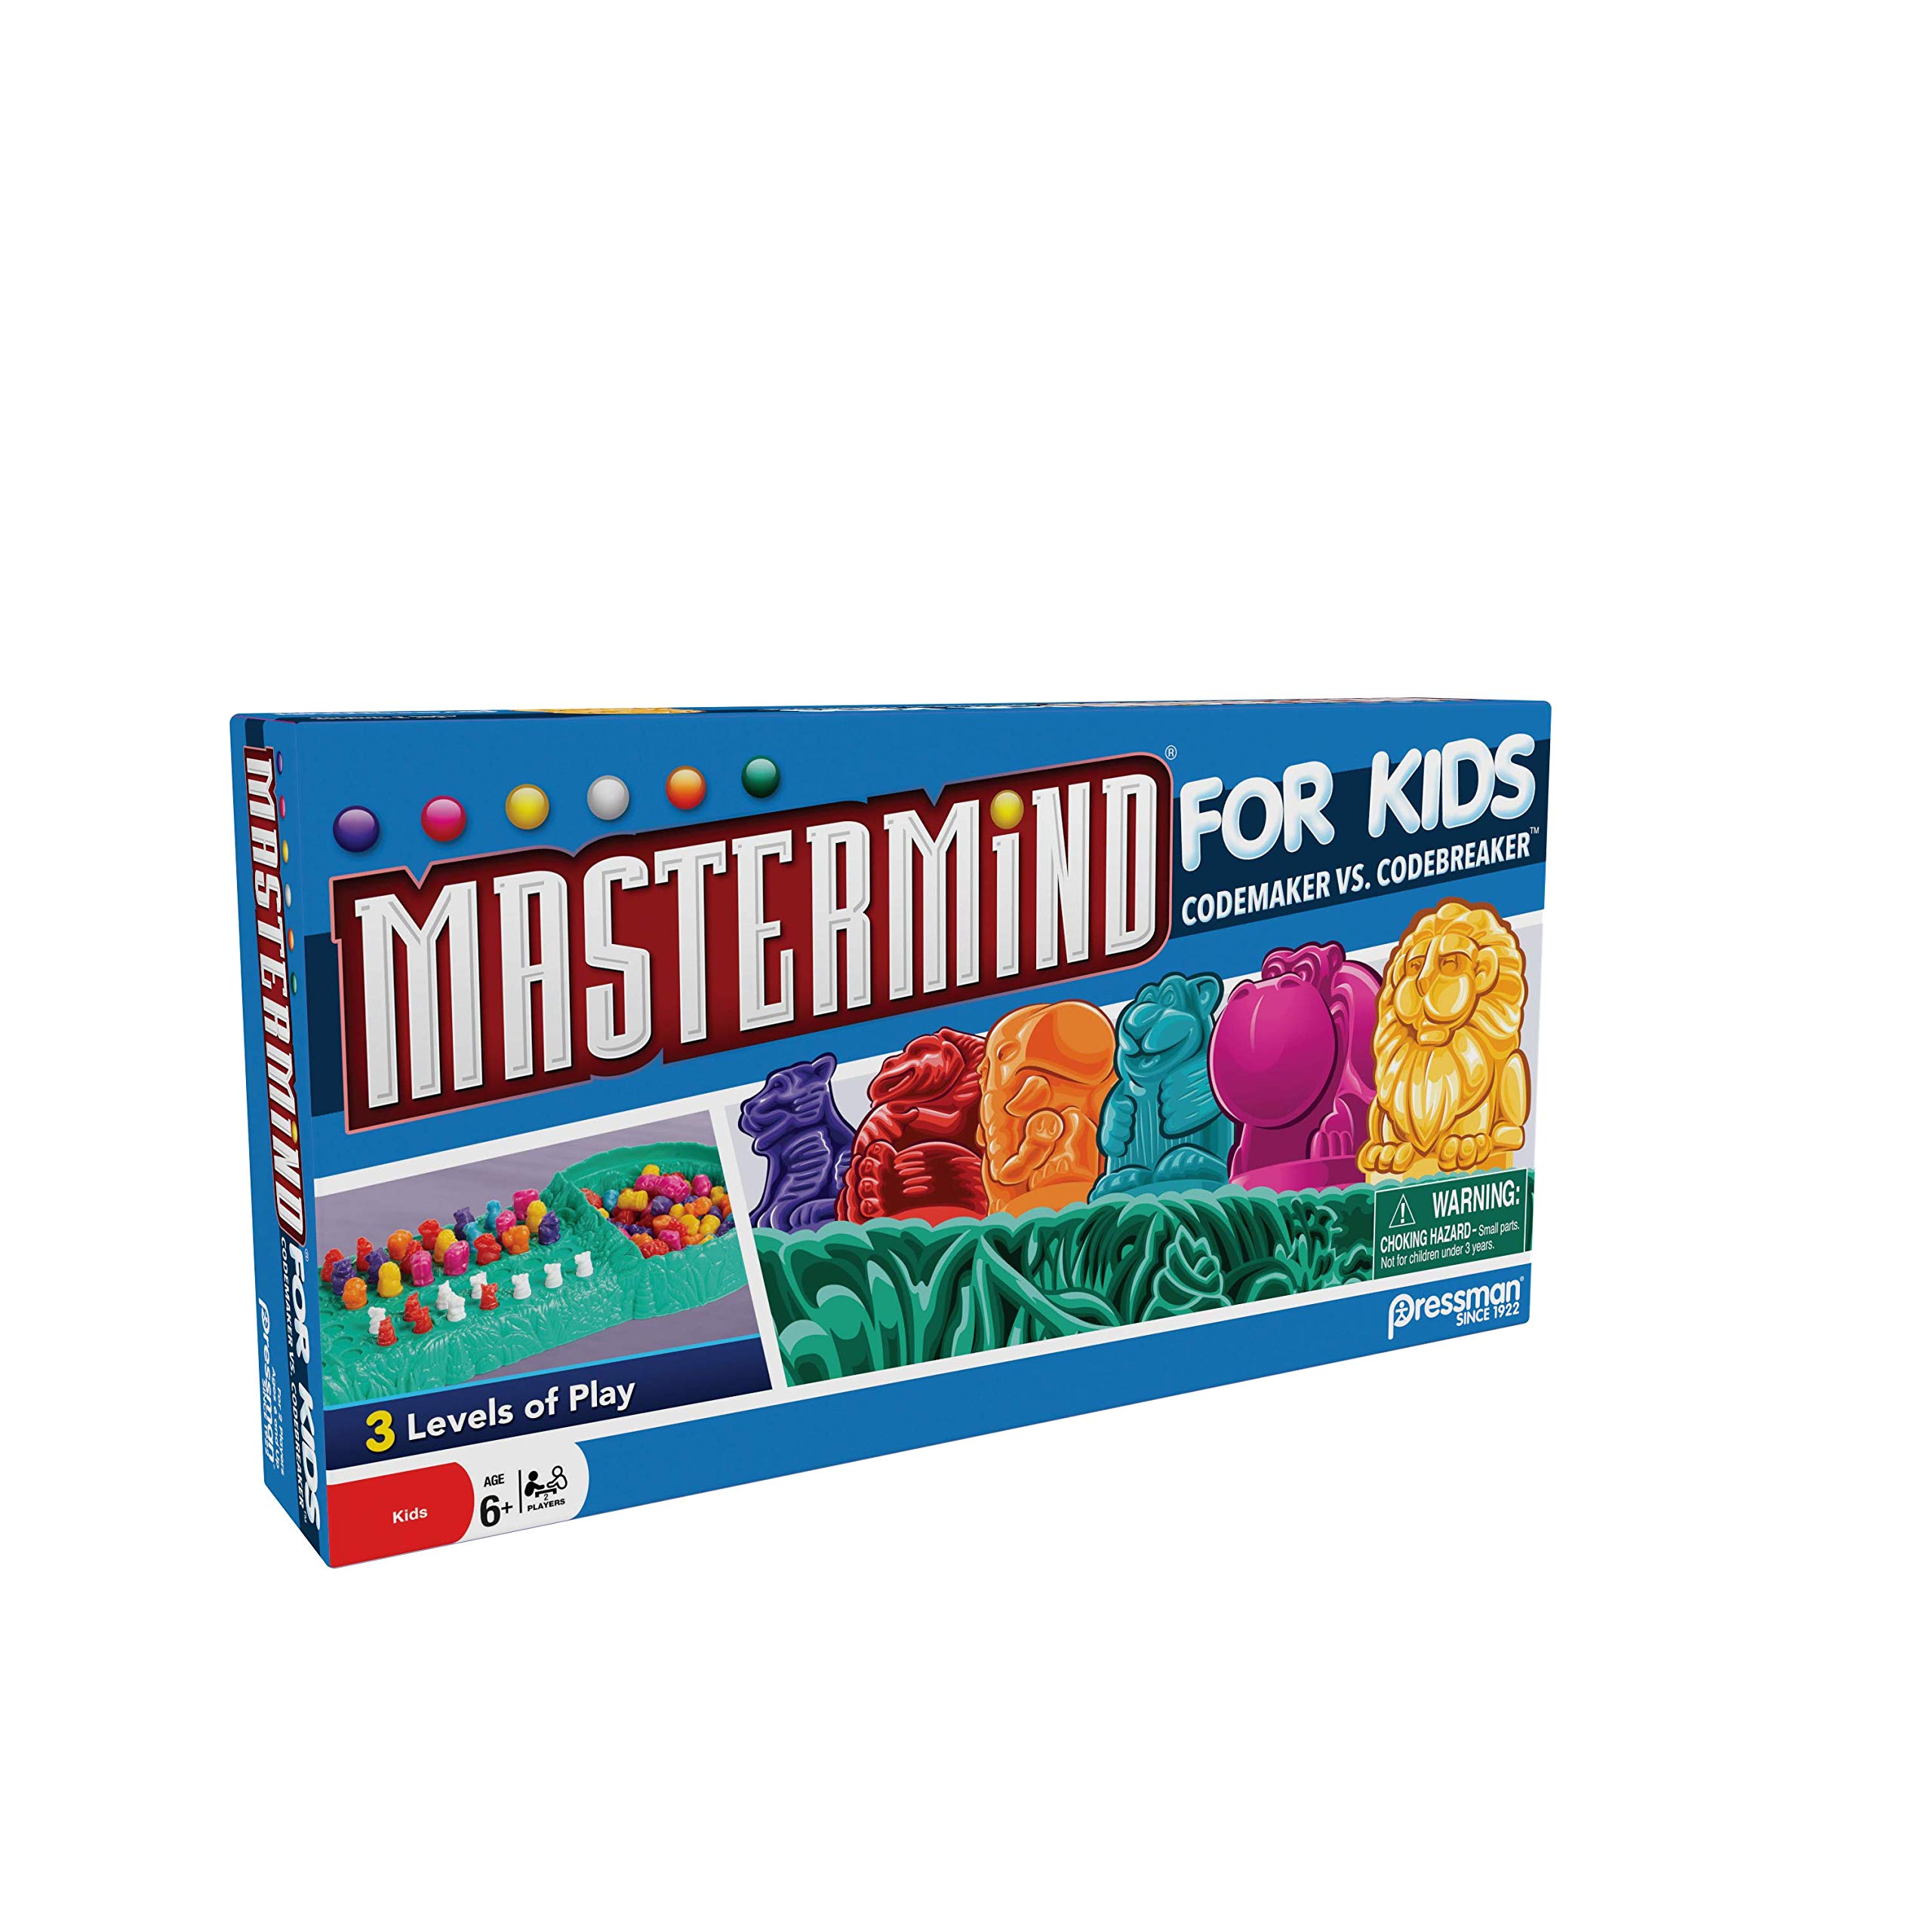 Pressman Mastermind for Kids - Codebreaking Game With Three Levels of Play Multicolor, 5